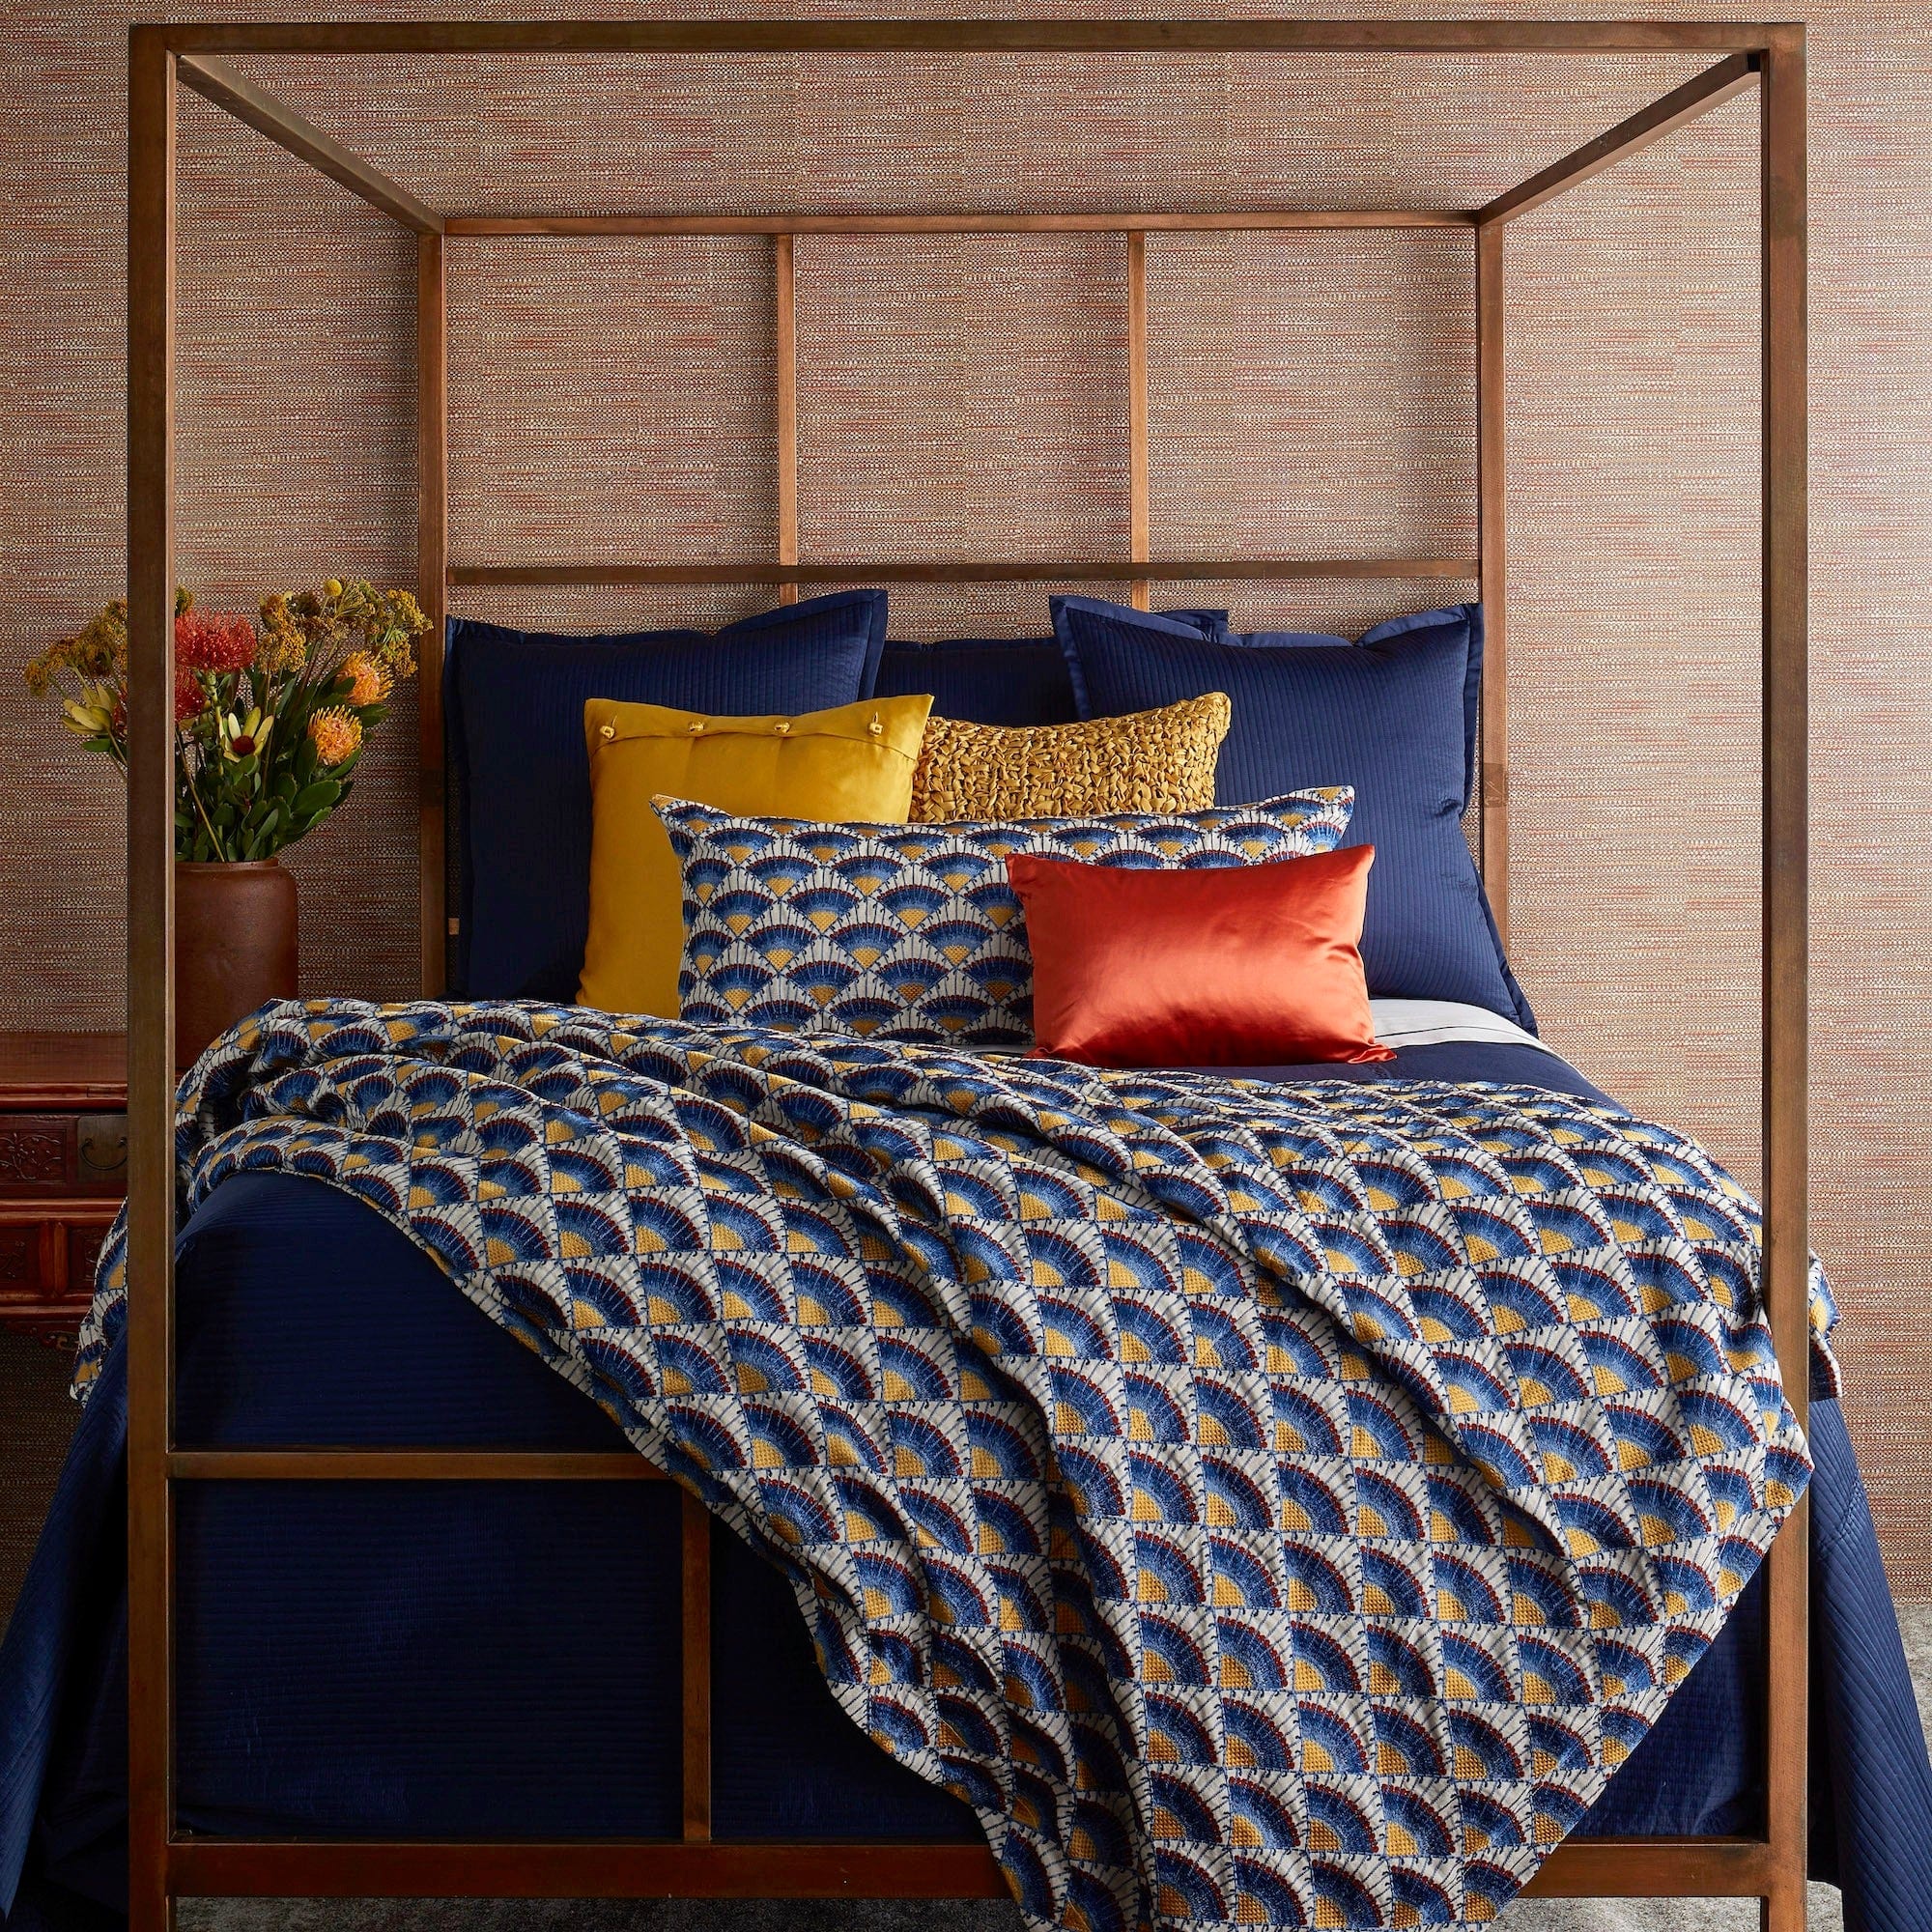 Linea Navy Blue Coverlet Set by Ann Gish - Shown with duvet cover and yellow pillows